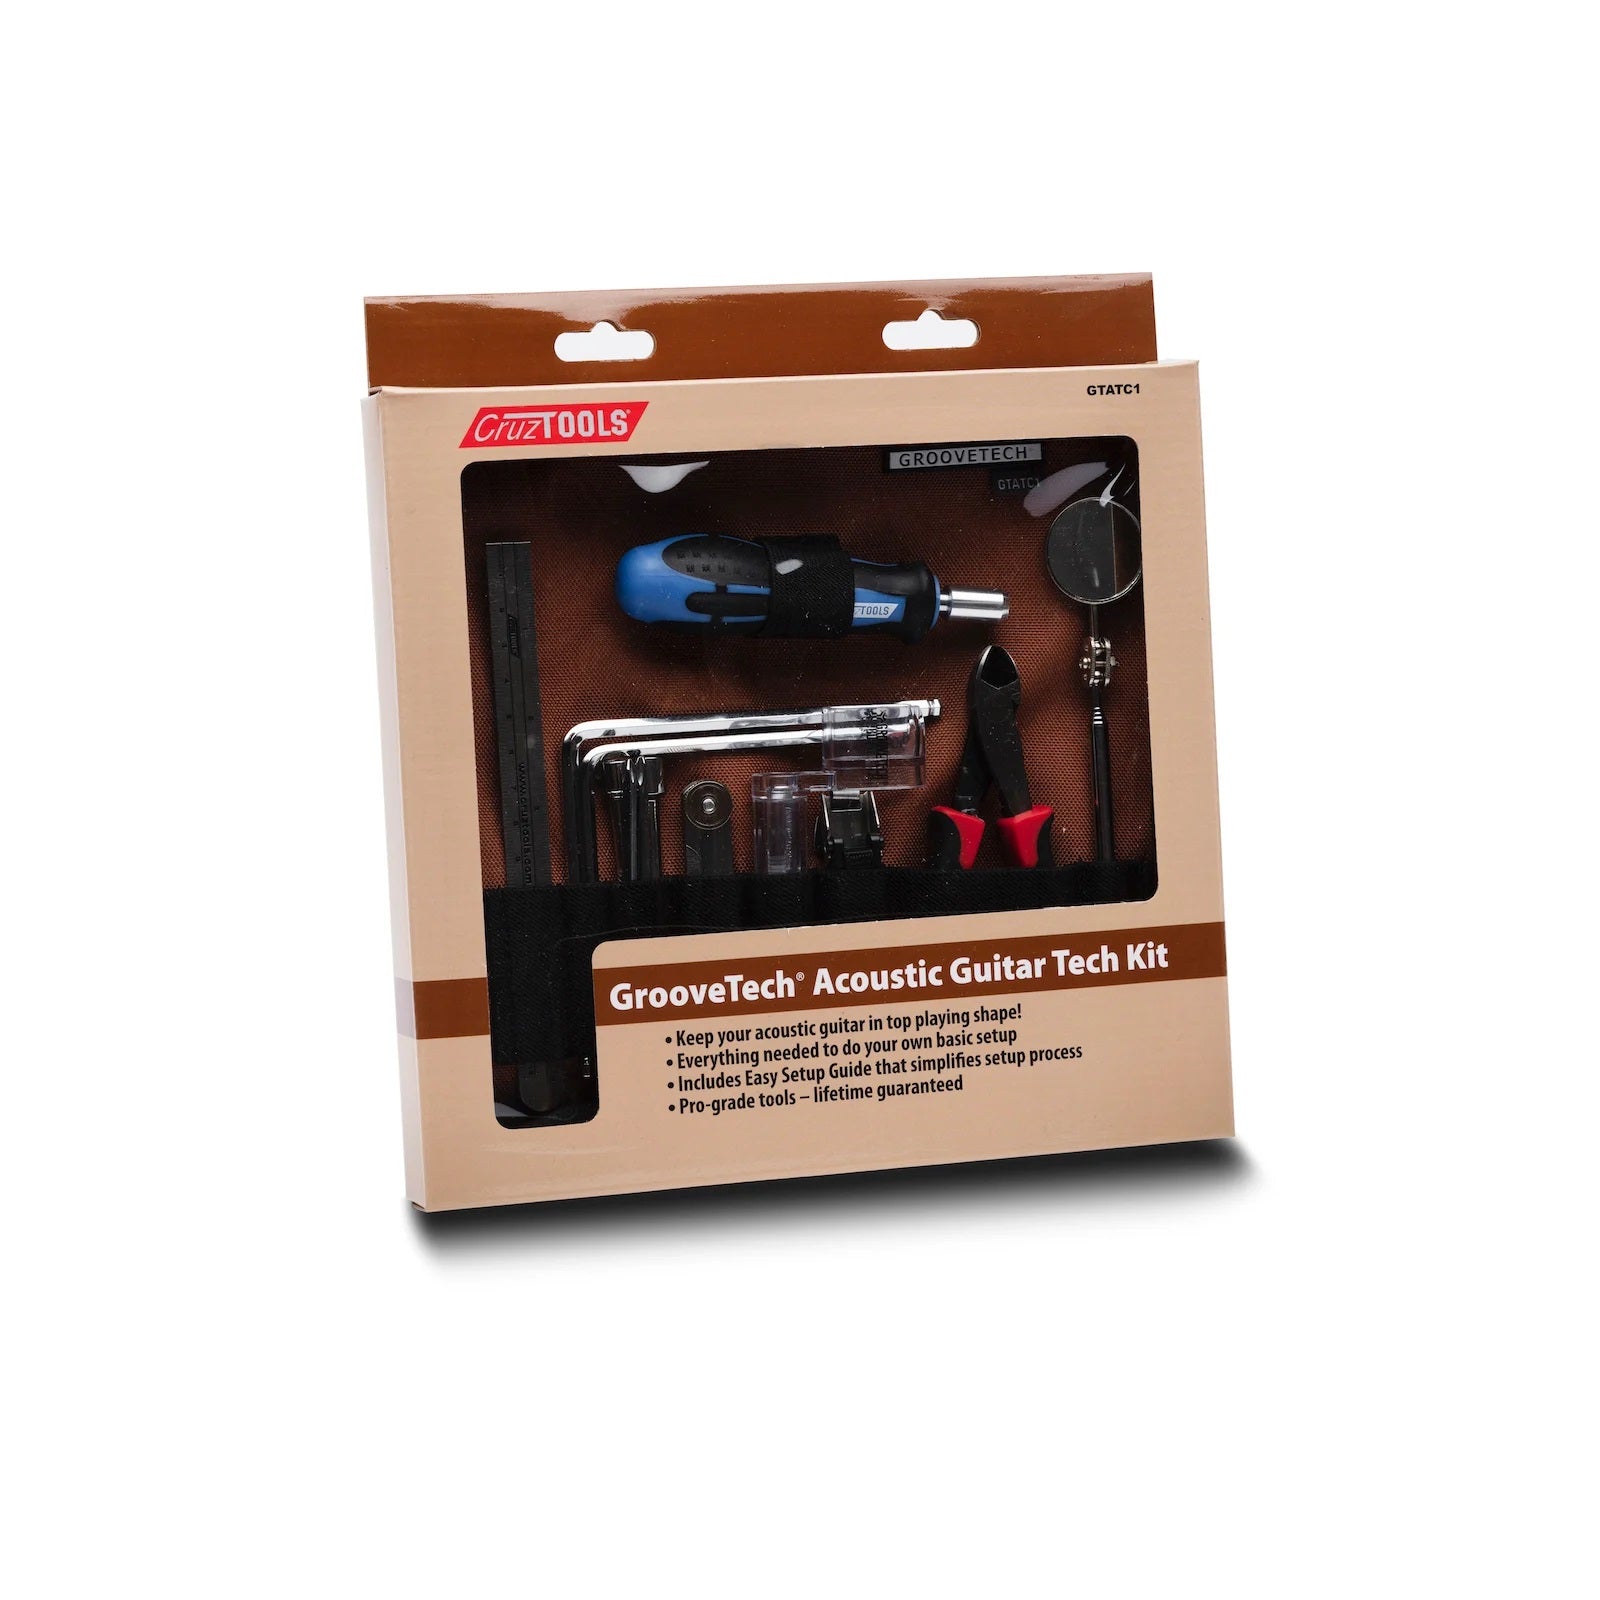 Martin GrooveTech Acoustic Guitar Tech Kit (CruzTools®)